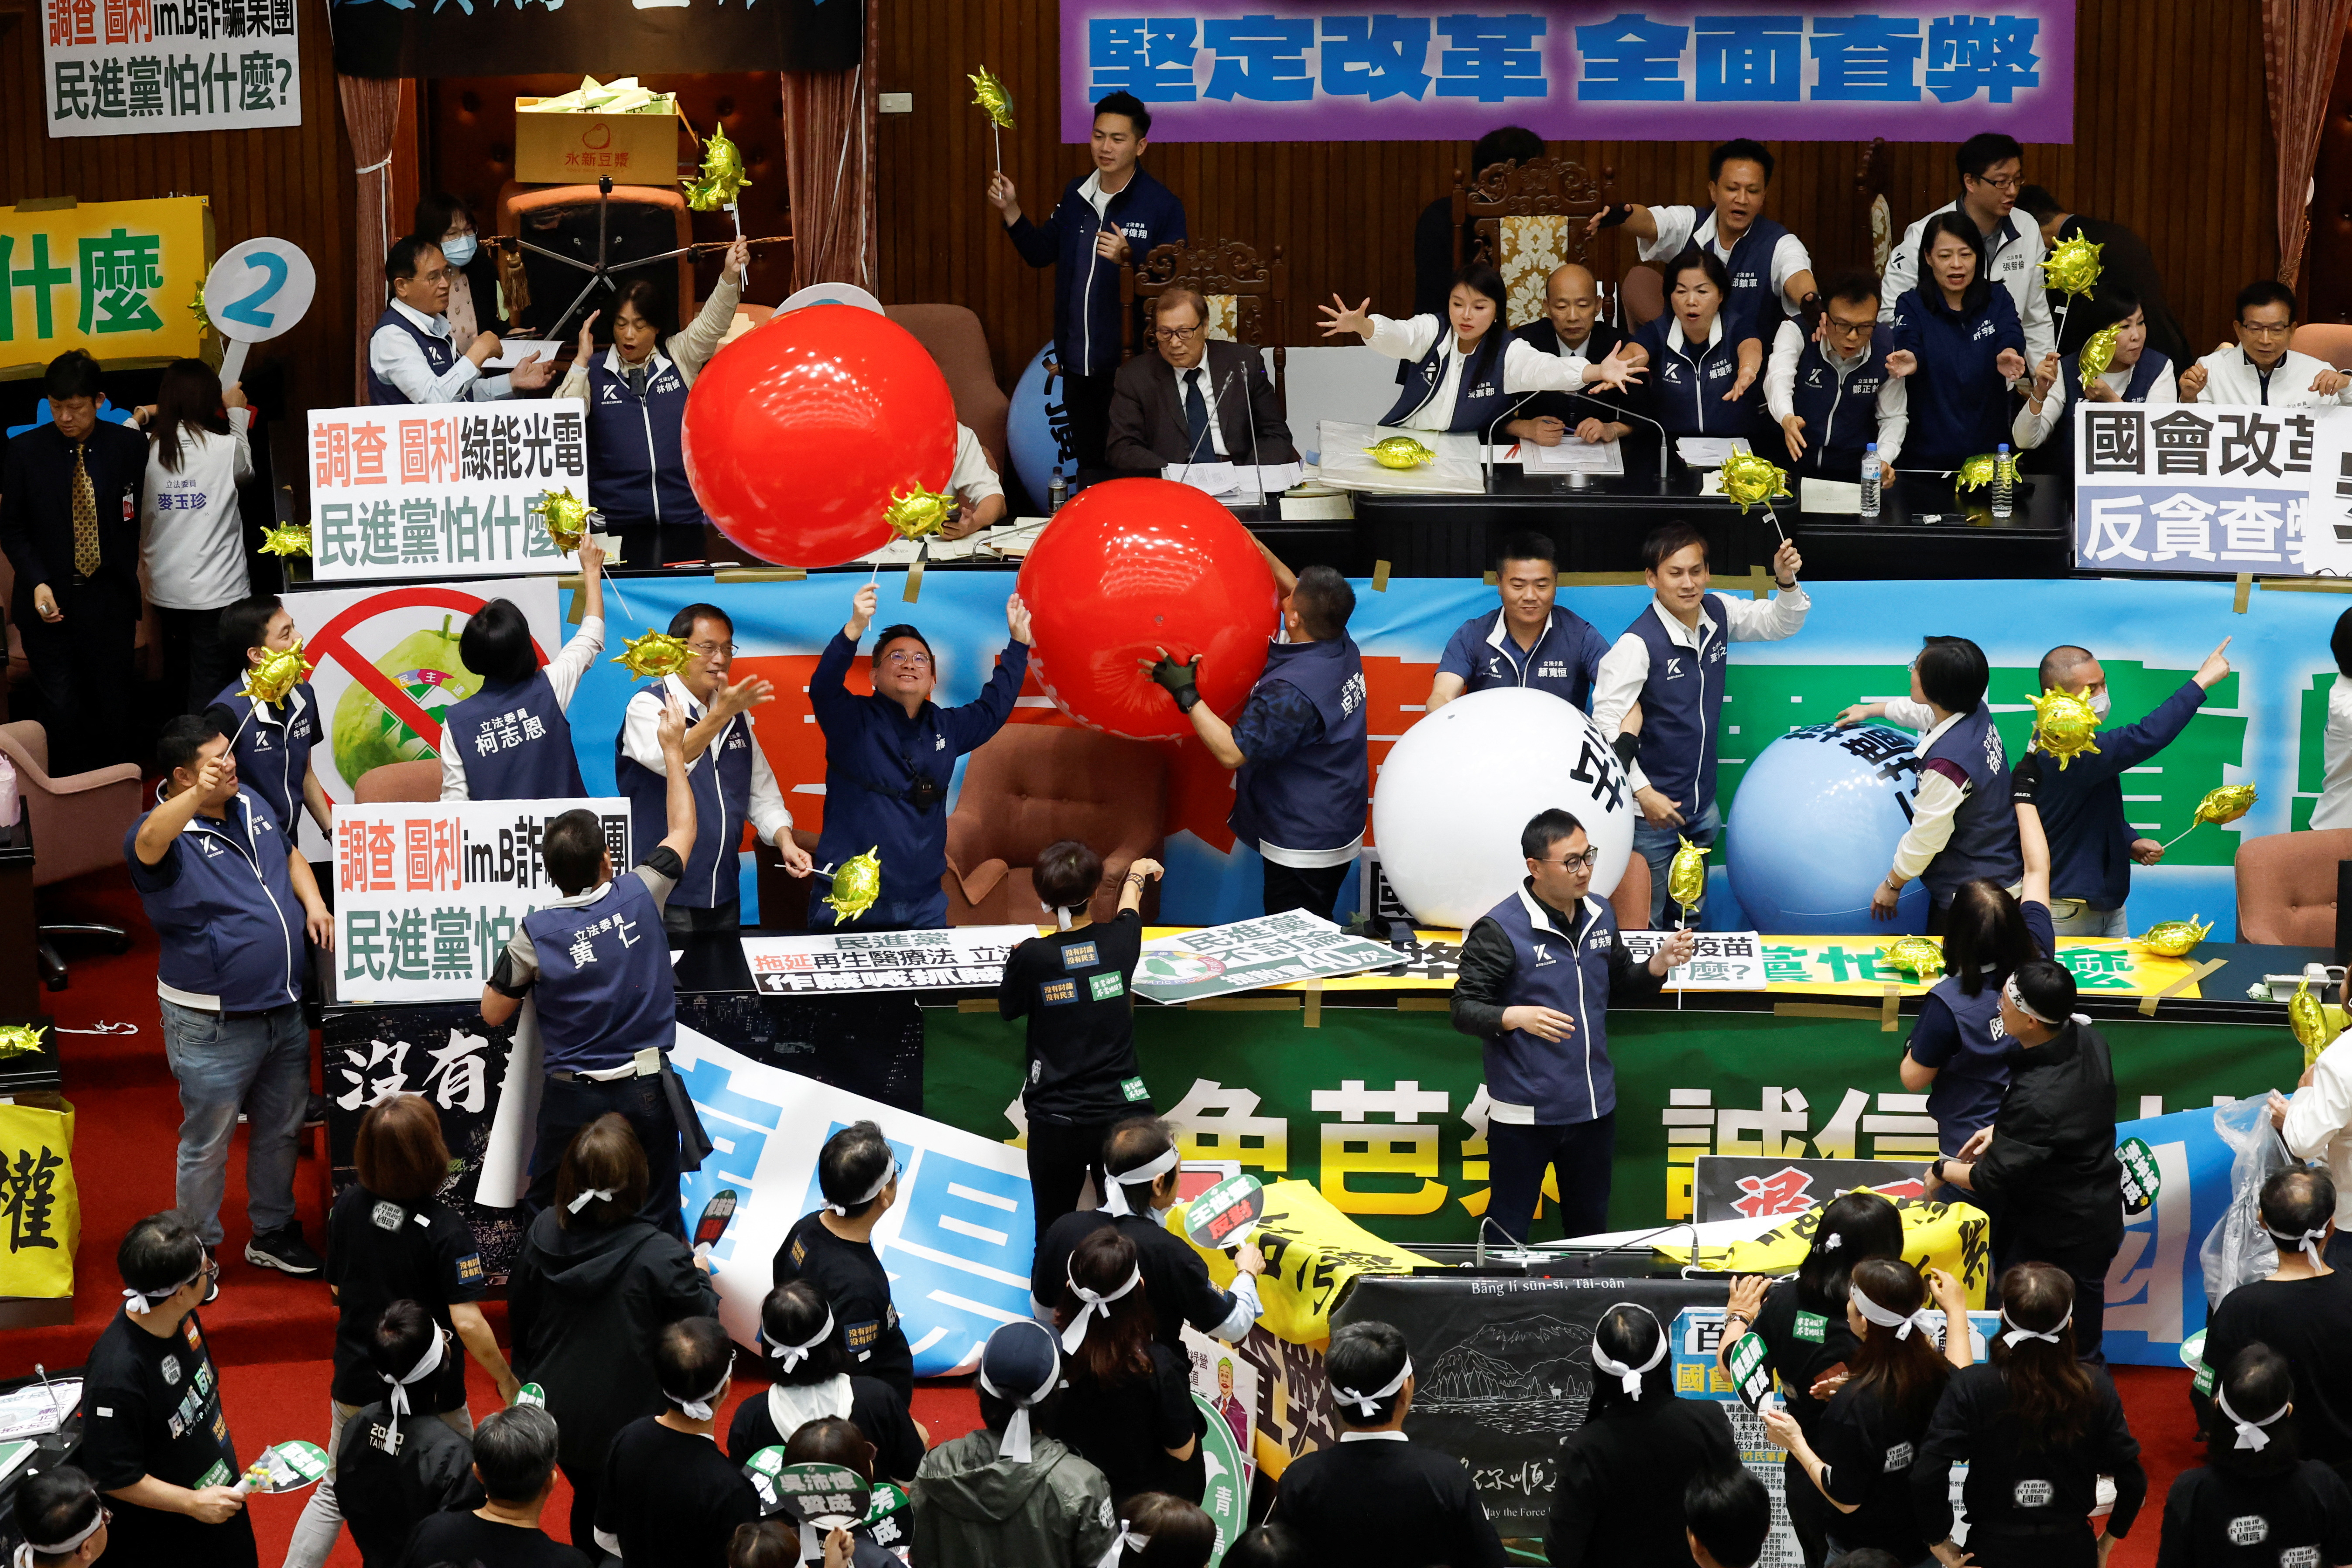 Lawmakers take part in a session as some hold inflatable balloons, at the Parliament in Taipei